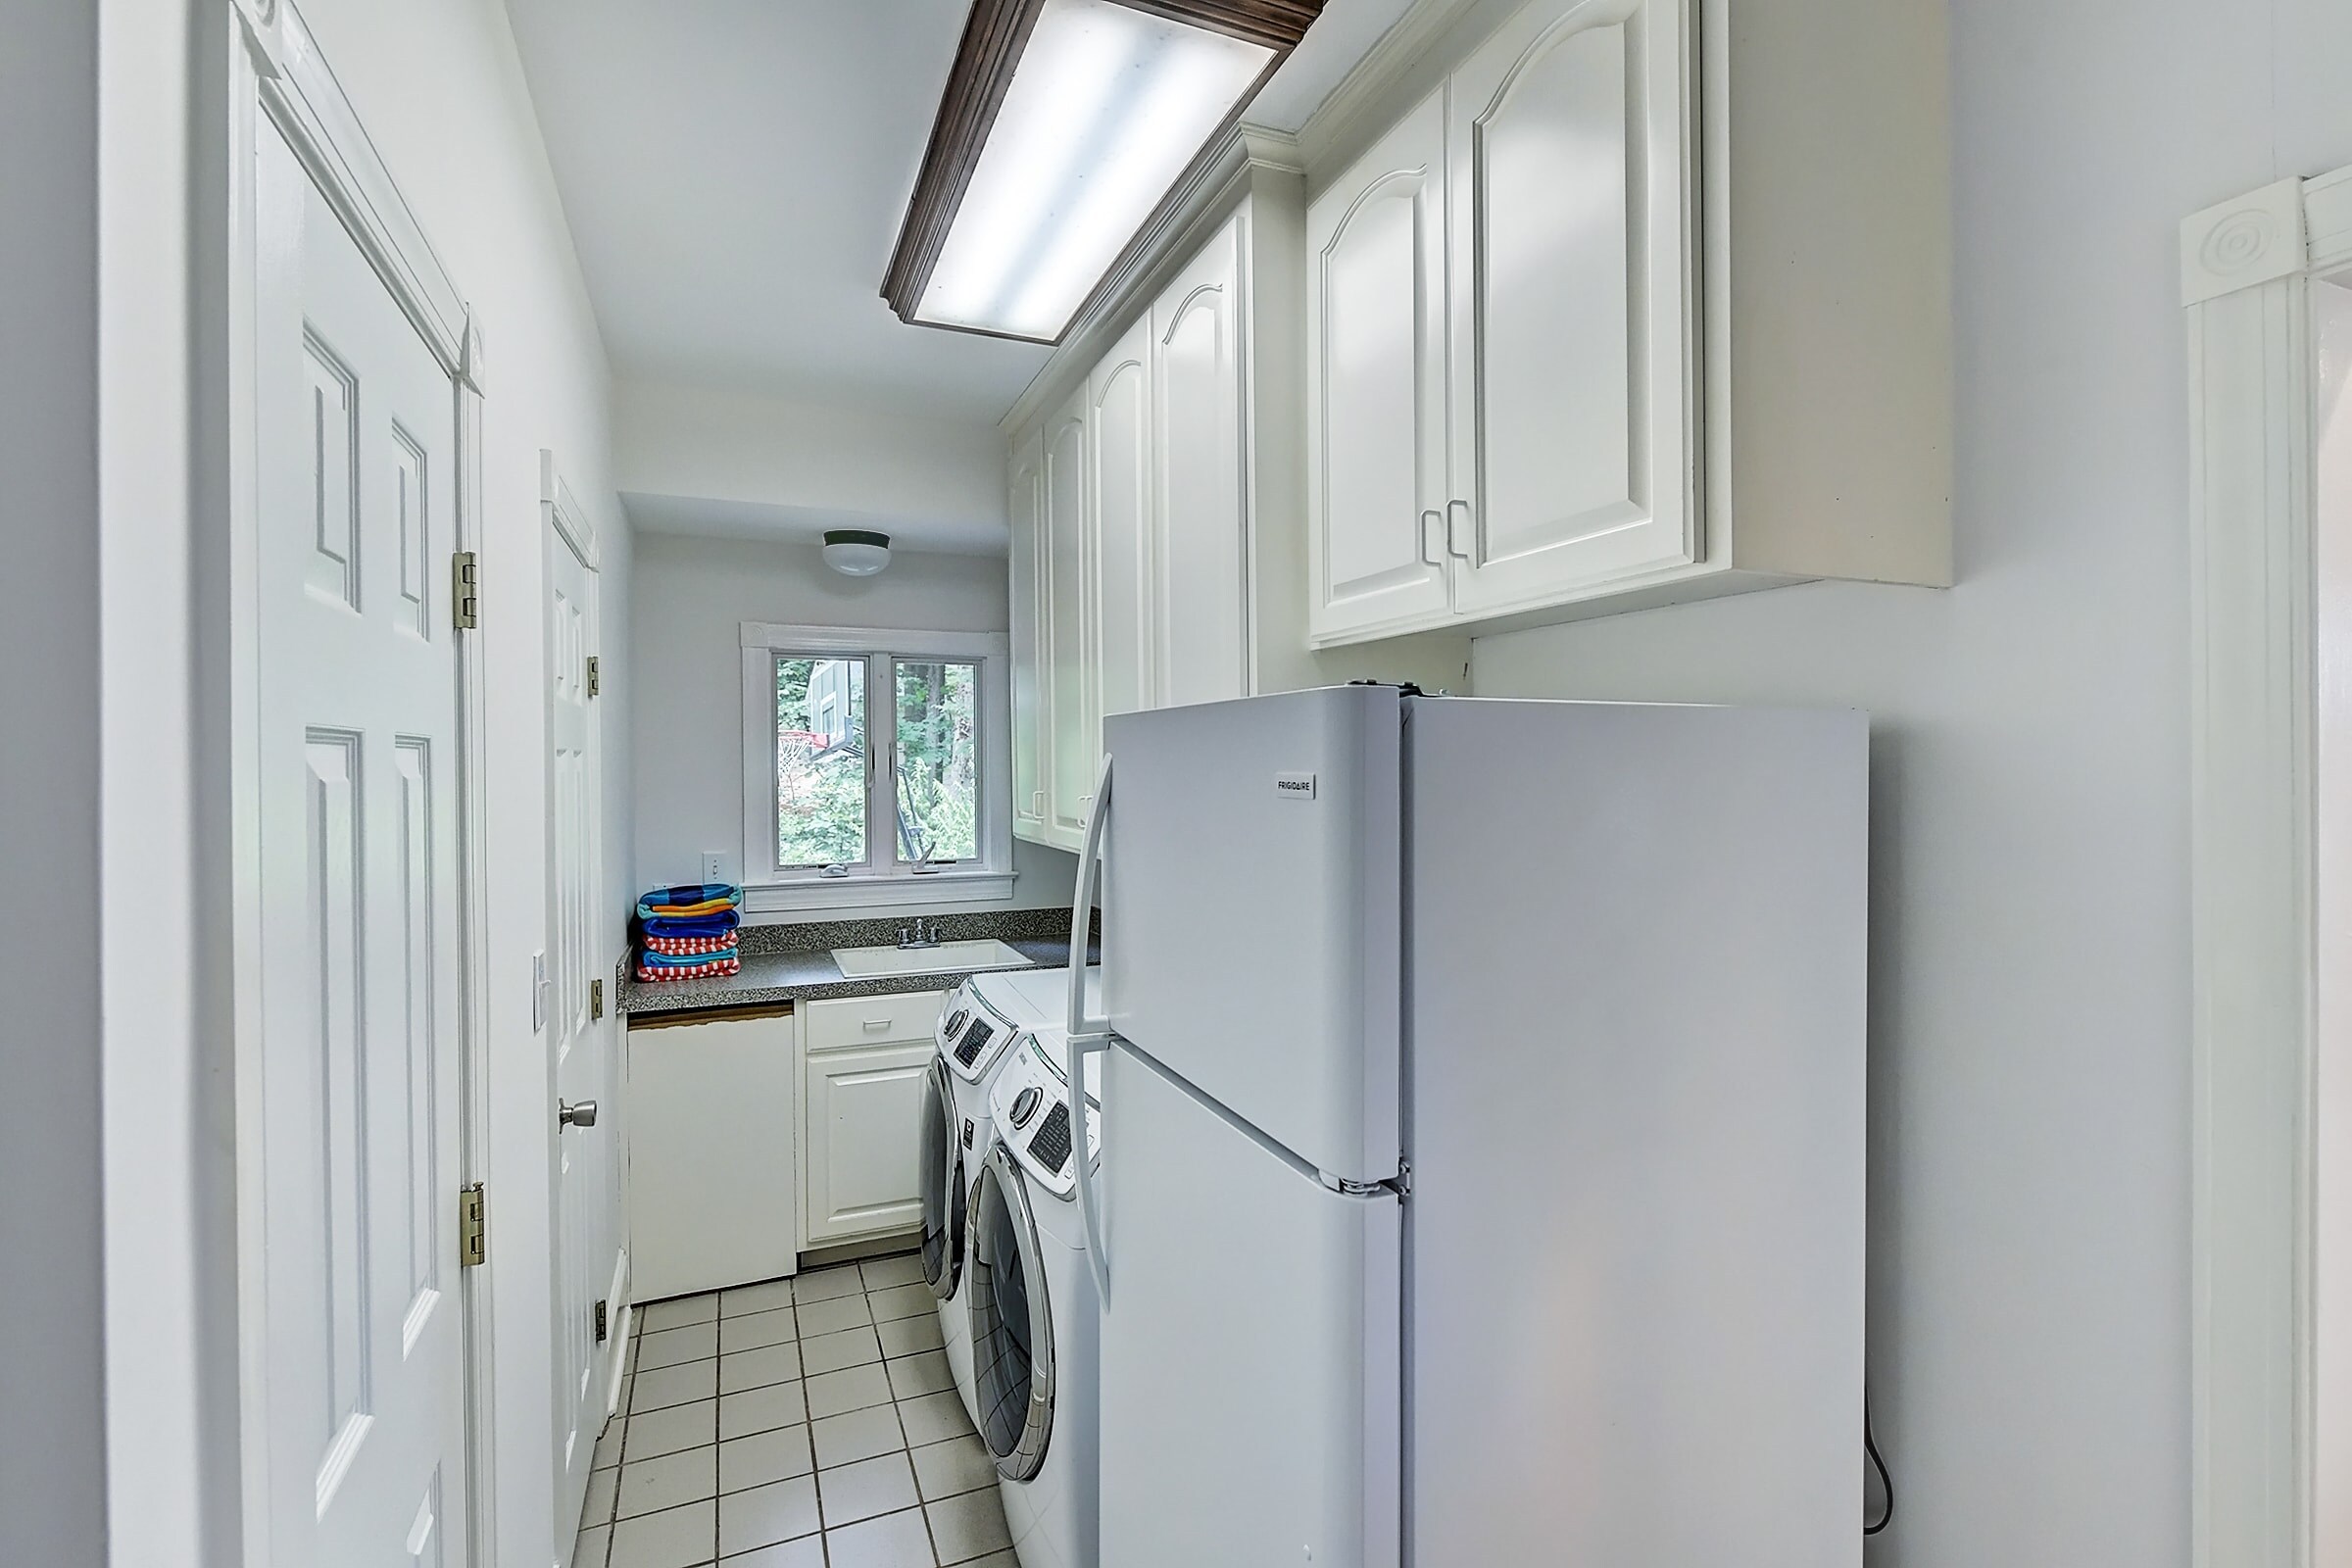 Main level-Laundry room with a washer and dryer.